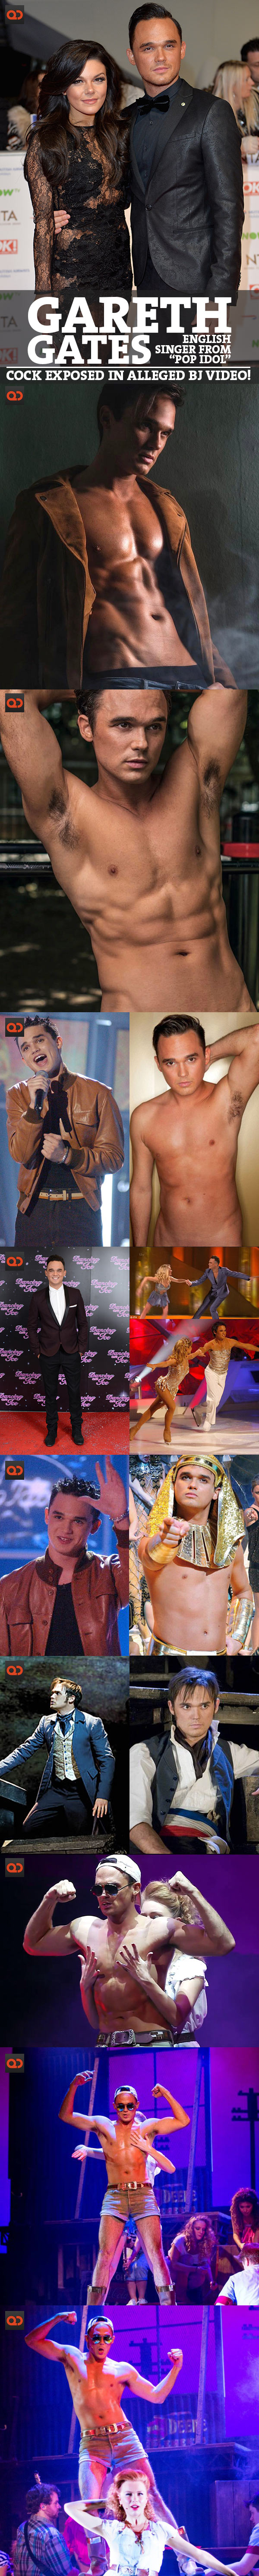 Gareth Gates, English Singer From “Pop Idol”, Cock Exposed In Alleged BJ Video!